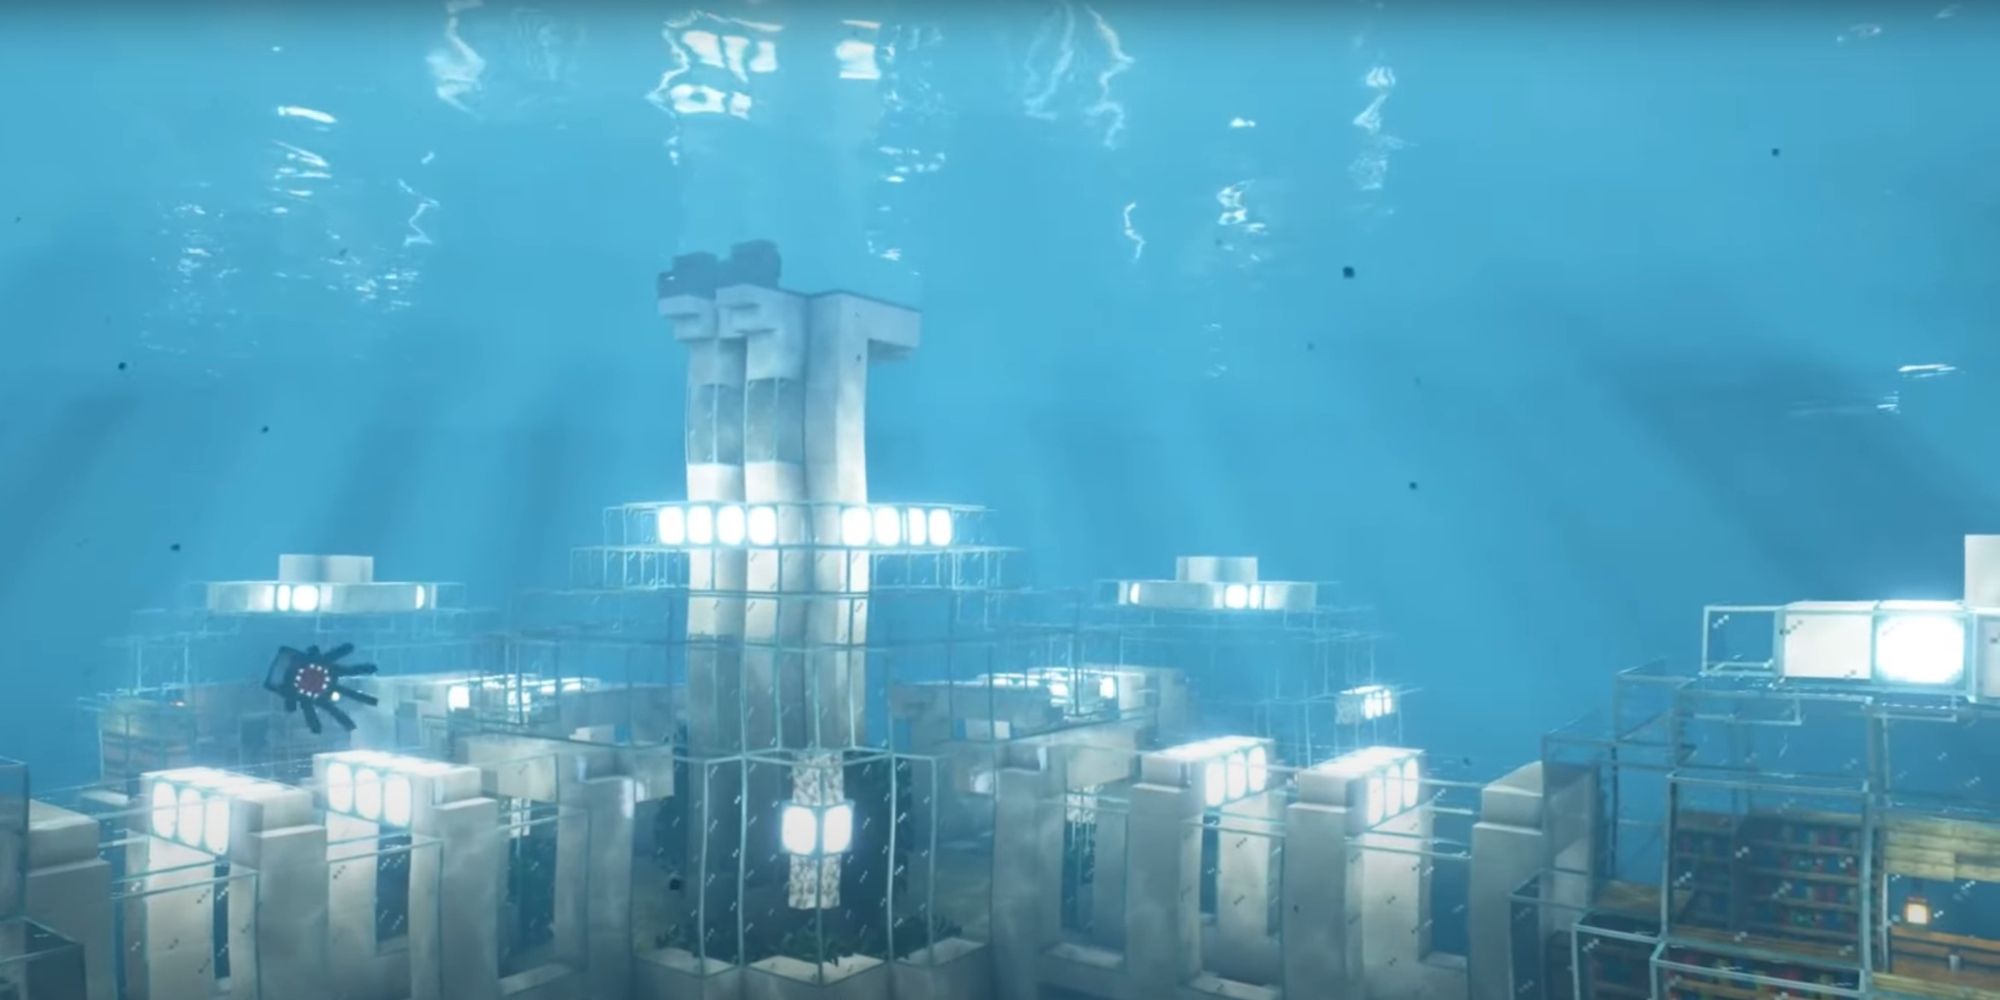 An image from Minecraft of a large underwater base with glass domes and a large elevator that takes you to the surface.